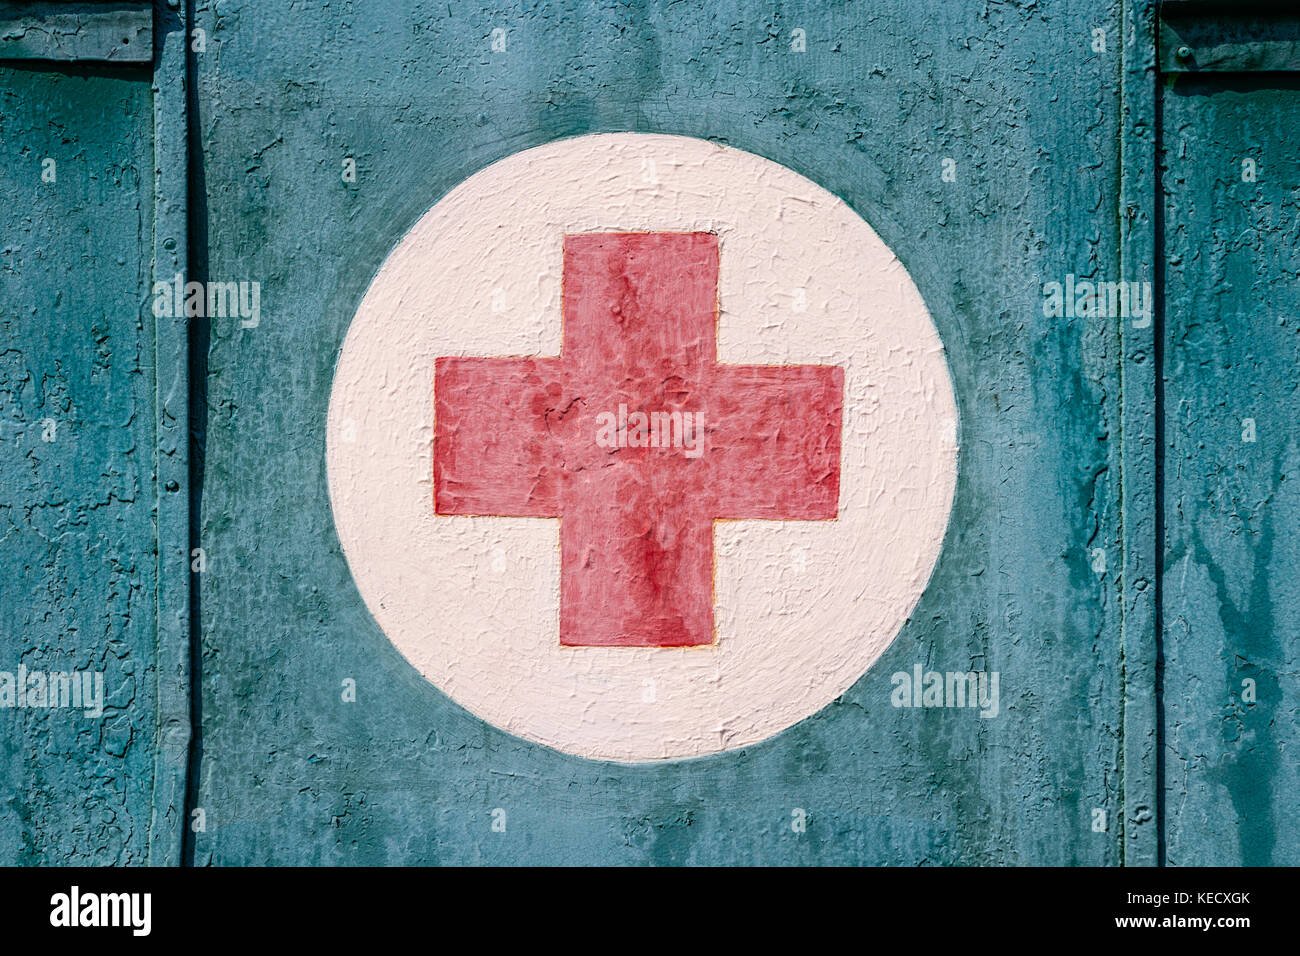 Weathered, painted red cross on a white cirkel against a cyan background. Stock Photo